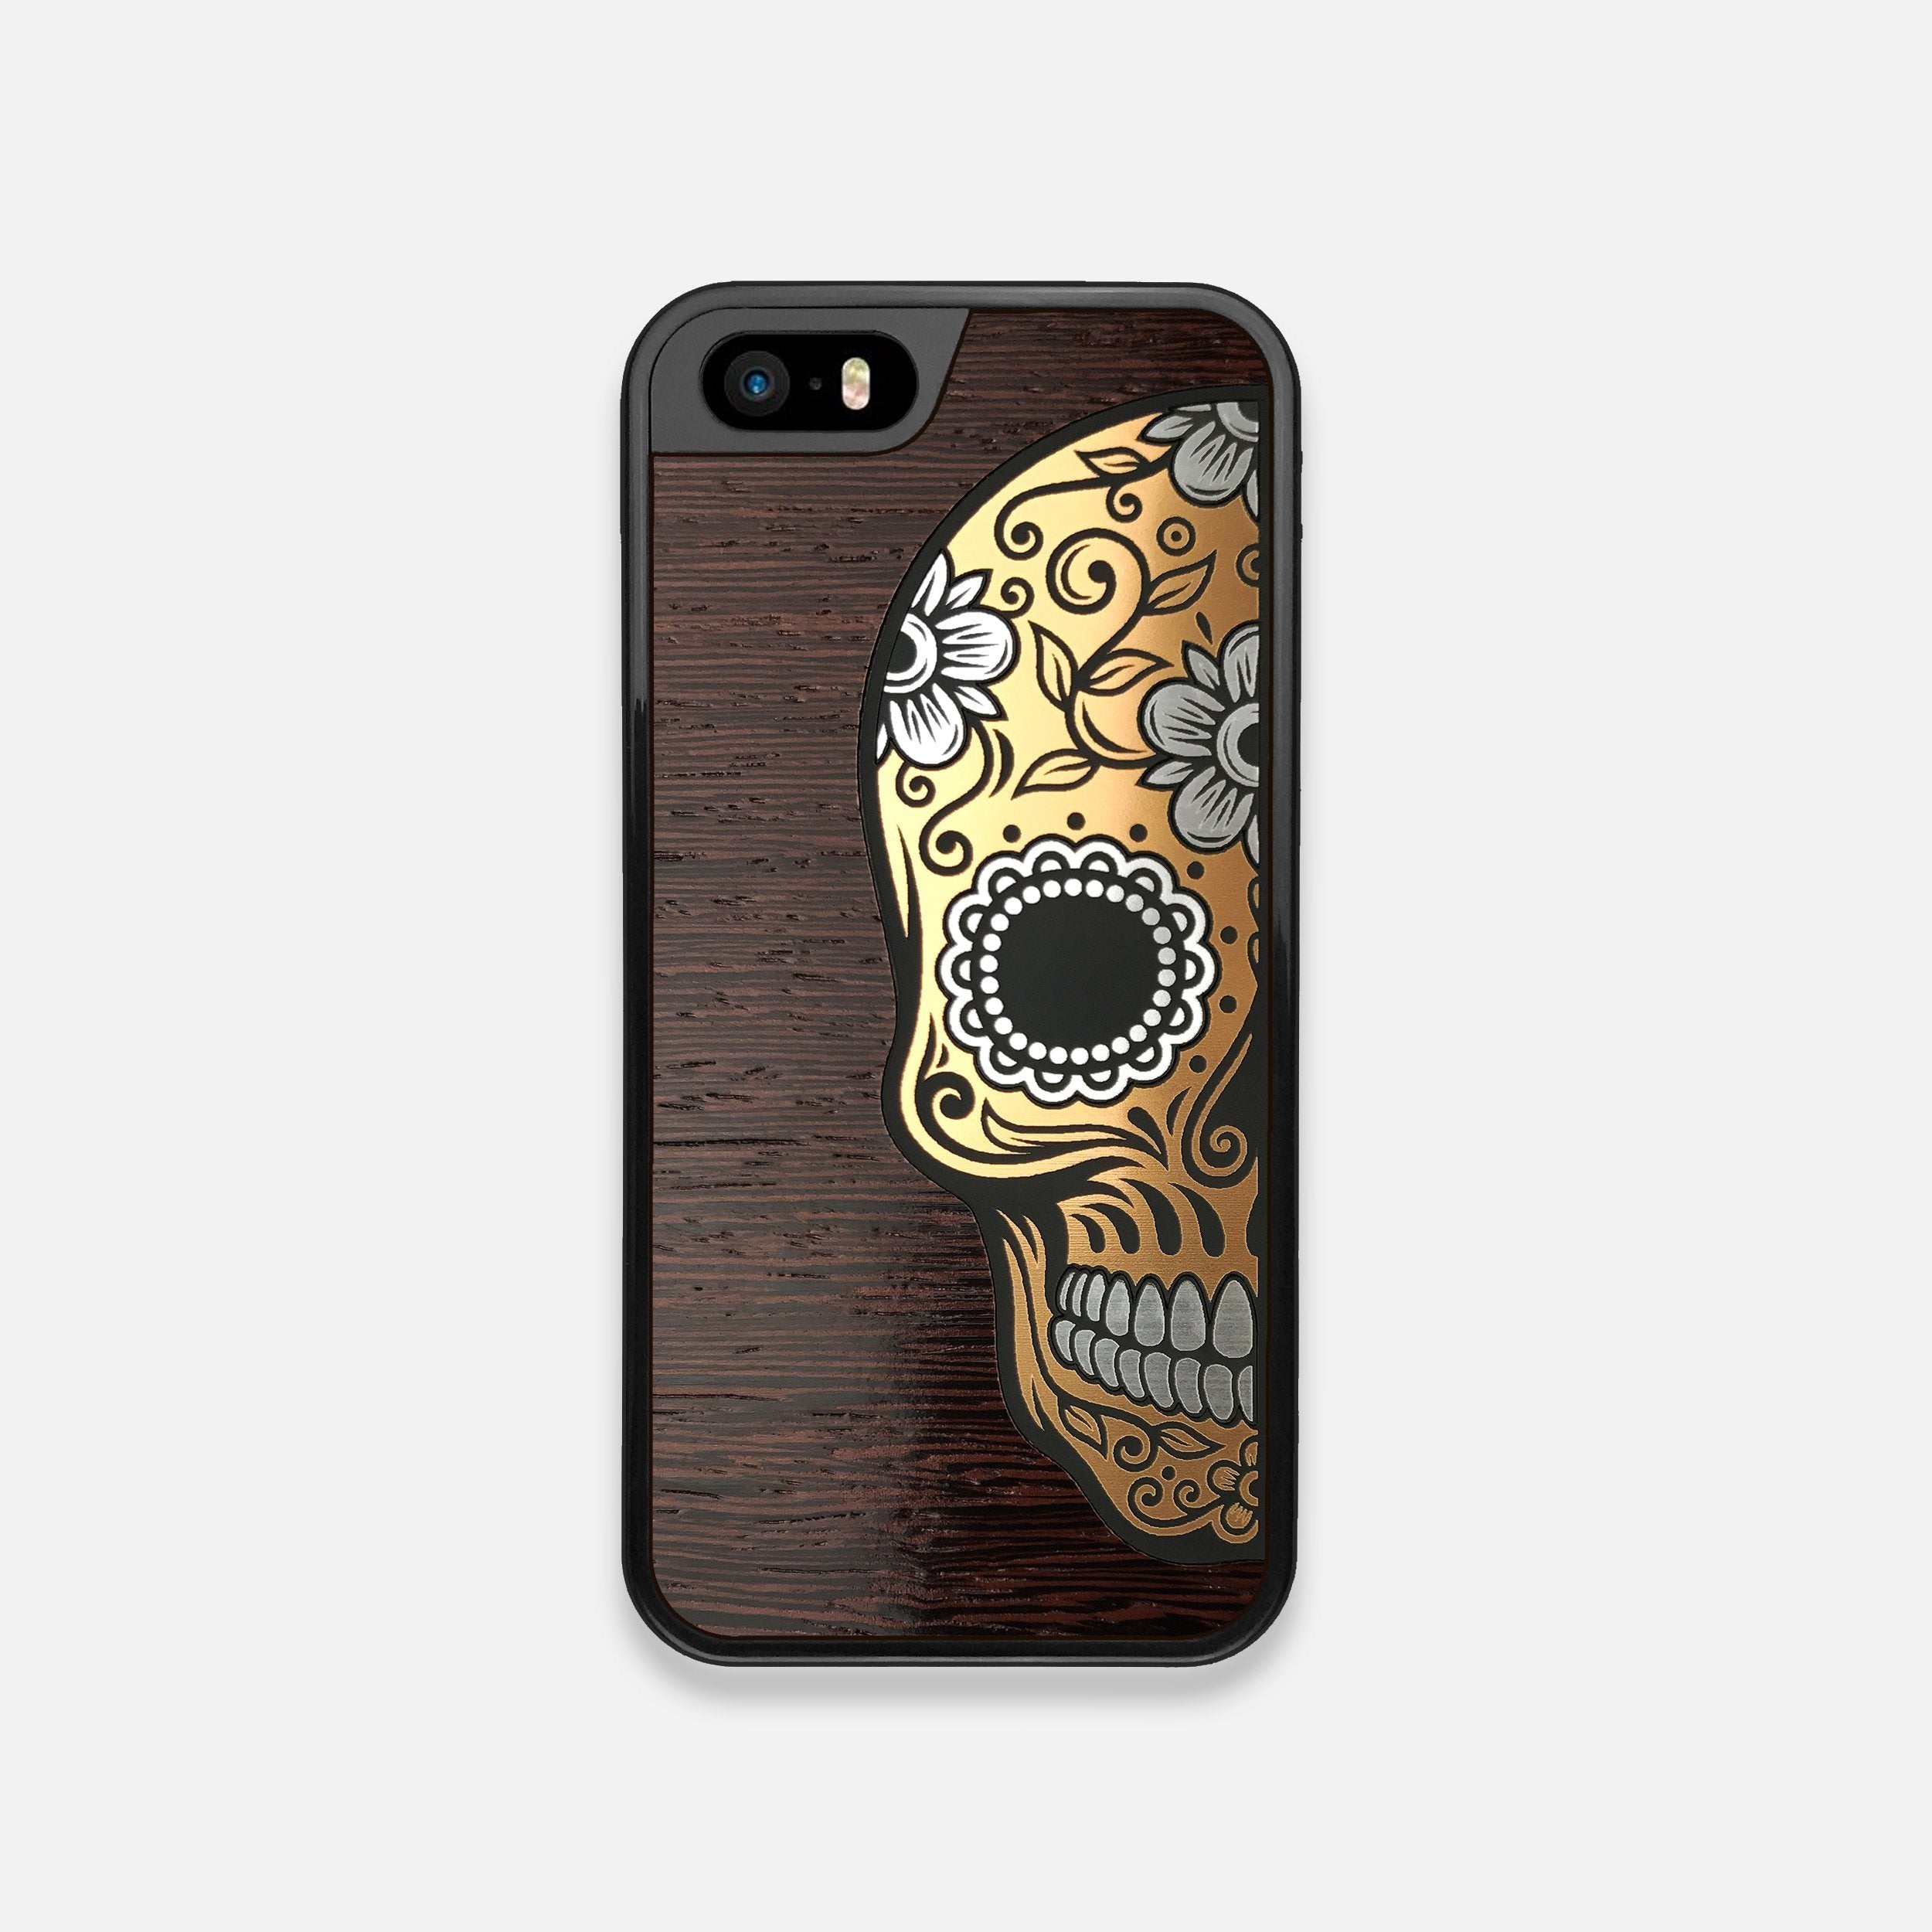 Front view of the Calavera Wood Sugar Skull Wood iPhone 5 Case by Keyway Designs